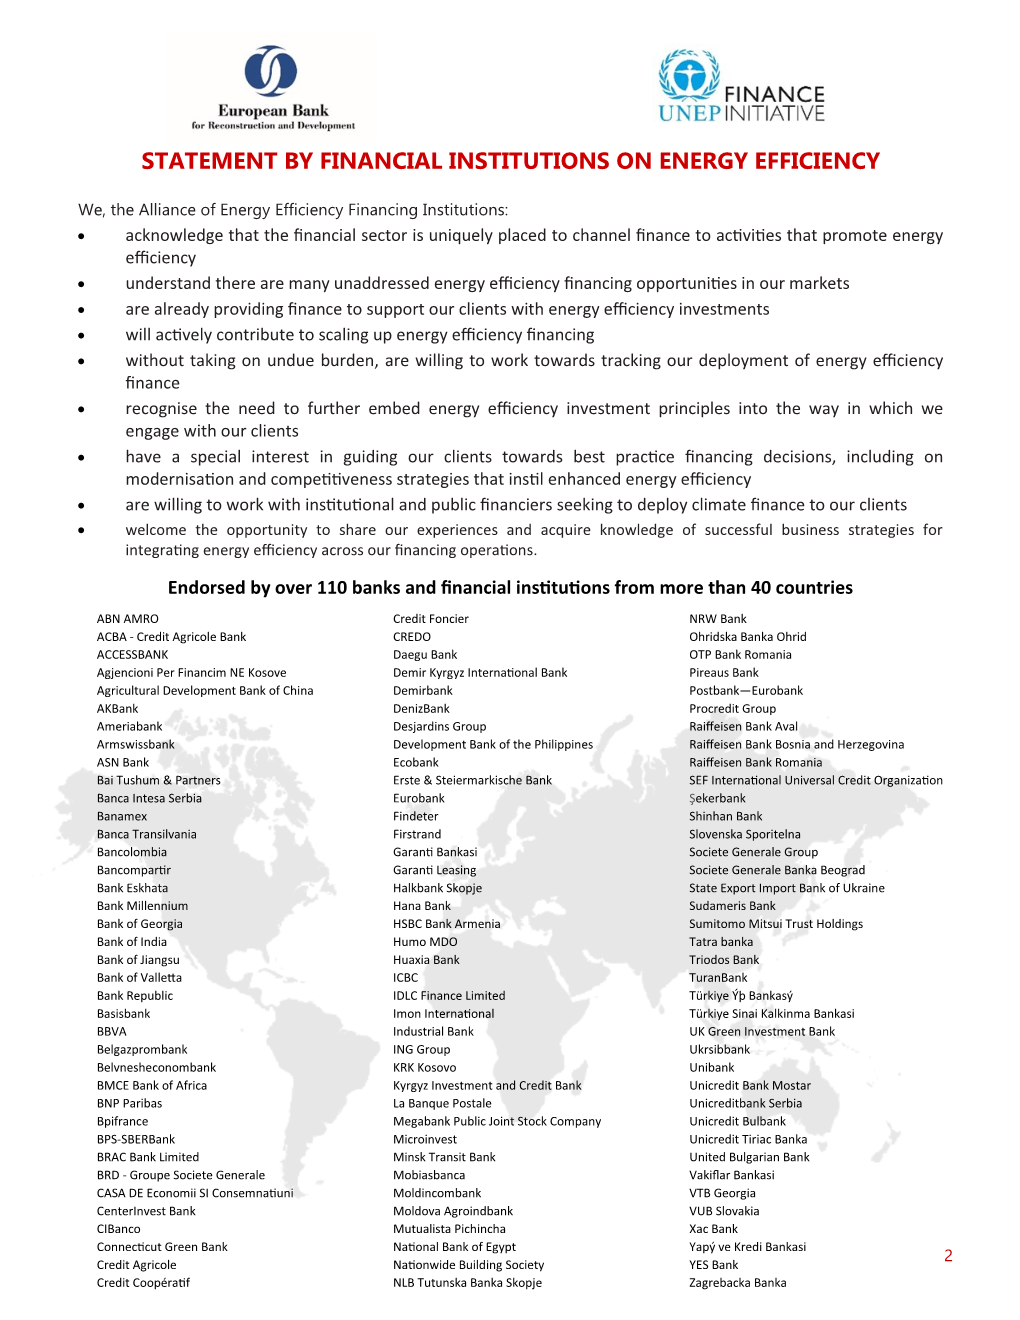 Statement by Financial Institutions on Energy Efficiency